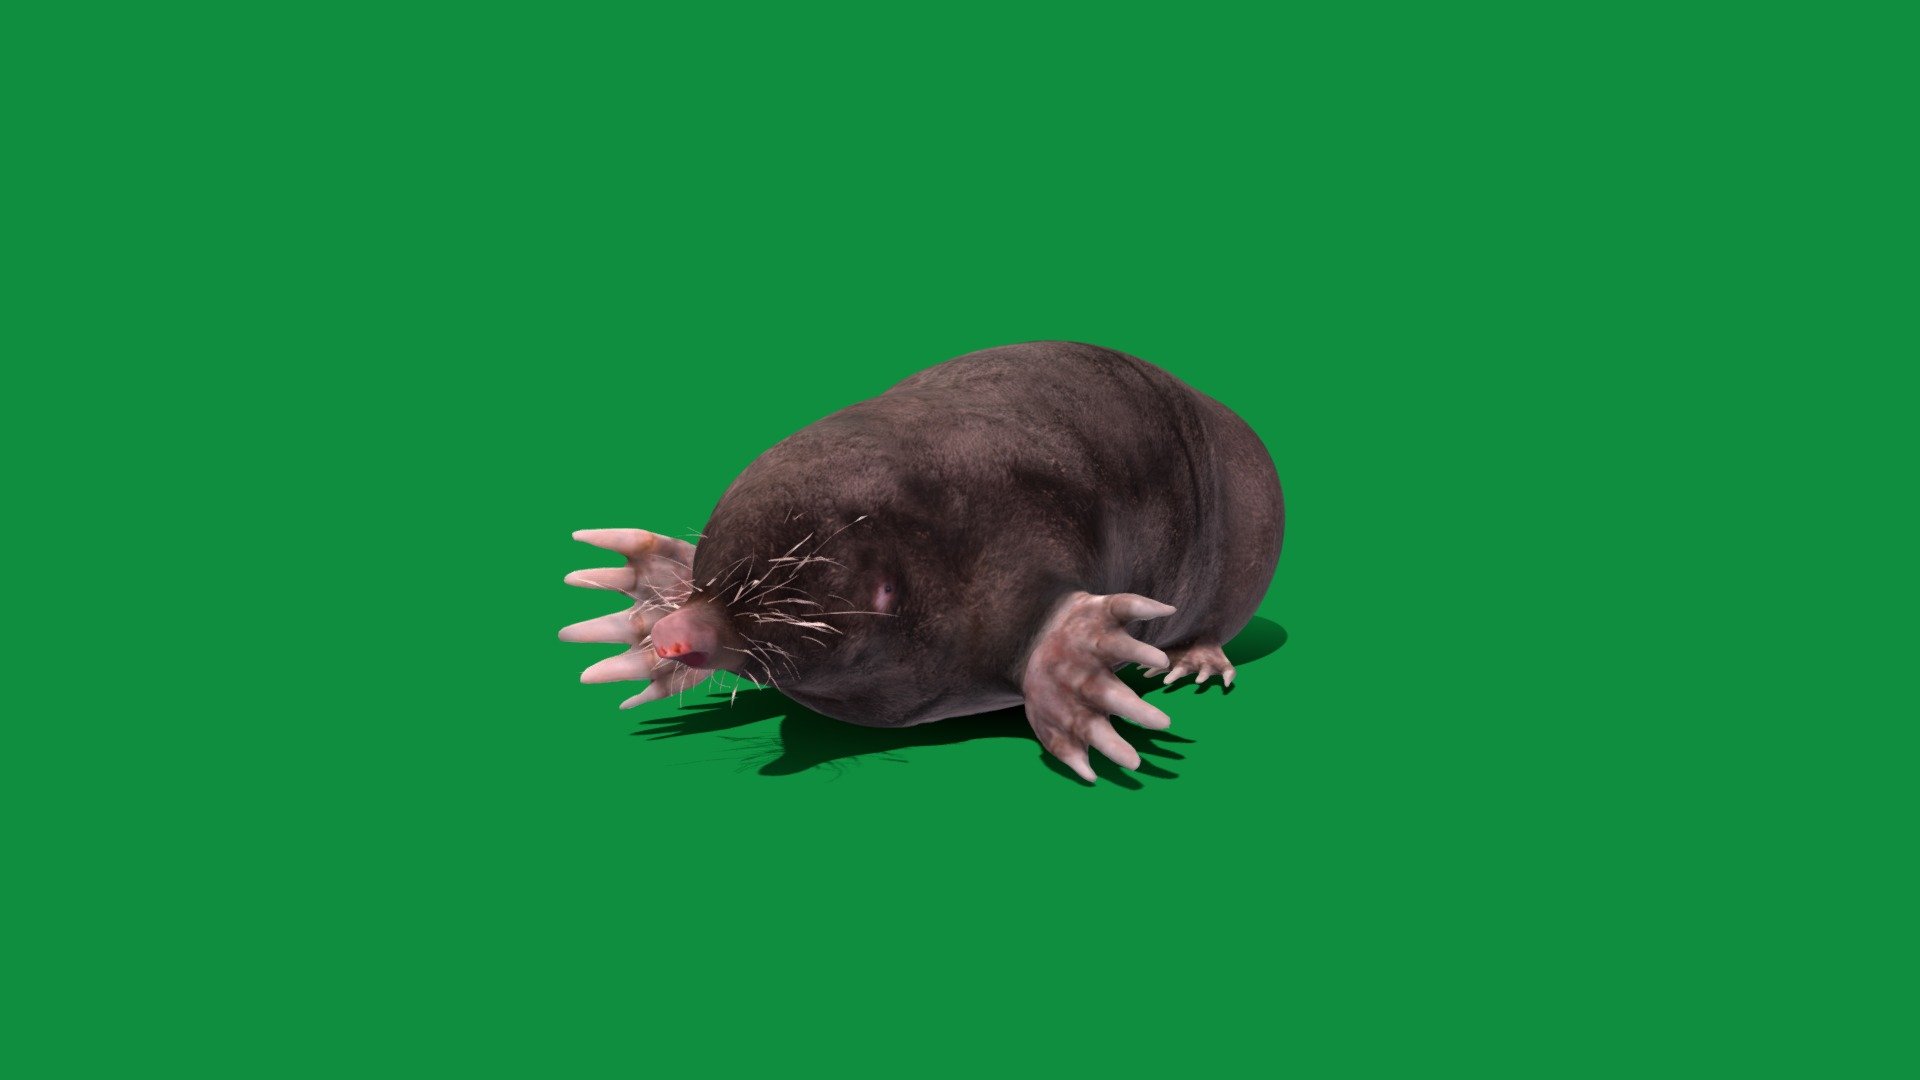 Eastern Mole(Talpidae)Burrower

Scalopus aquaticus Animal Mammal(Scalopus)Cute,Pet

1 Draw Calls

Low-MidPoly

Game Ready(Character)

Subdivision Surface Ready

11-Animations 

4K PBR Textures 1 Material

Unreal/Unity FBX 

Blend File 3.6.5 LTS/4 Plus

USDZ File(AR Ready). Real Scale Dimension (Xcode ,Reality Composer, Keynote Ready)

Textures File


GLB/GlTF  (Unreal 5.1 Plus Native Support,Godot,Spark AR,Lens Studio(SnapChat),Effector(Tiktok),Spline,Play Canvas,Omniverse,GDevelop-5,BuildBox)




Triangles -64525



Faces -32782

Edges -65081

Vertices -32402

Diffuse,Metallic,Roughness,Normal Map,Specular Map,AO

The eastern mole  is a medium-sized mole native to the eastern United States, northern Mexico, and southwestern Ontario, Canada. It has a velvety, thick fur that can be black, silver, or copper in color, and a short, round tail covered in scales - Eastern Mole (Game Ready) - Buy Royalty Free 3D model by Nyilonelycompany 3d model